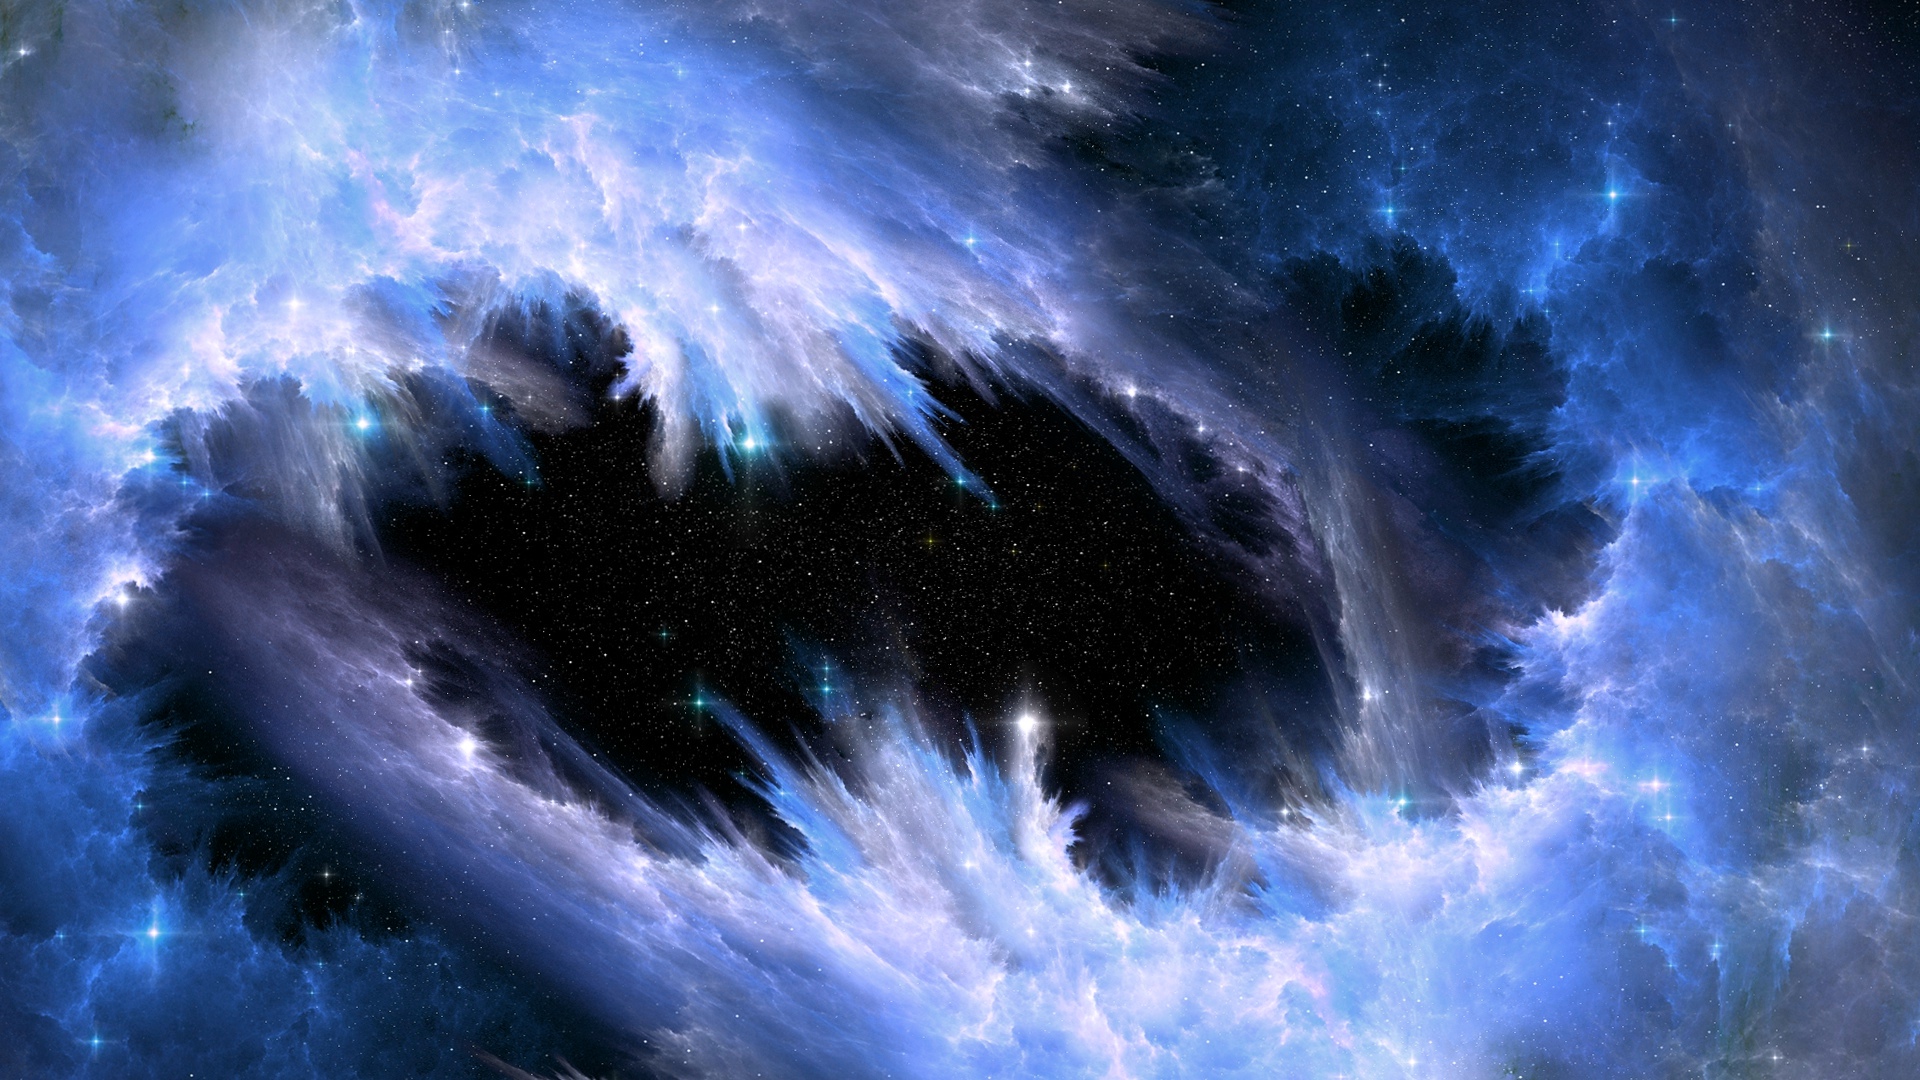 Abstract Space Wallpaper Which Is Under The